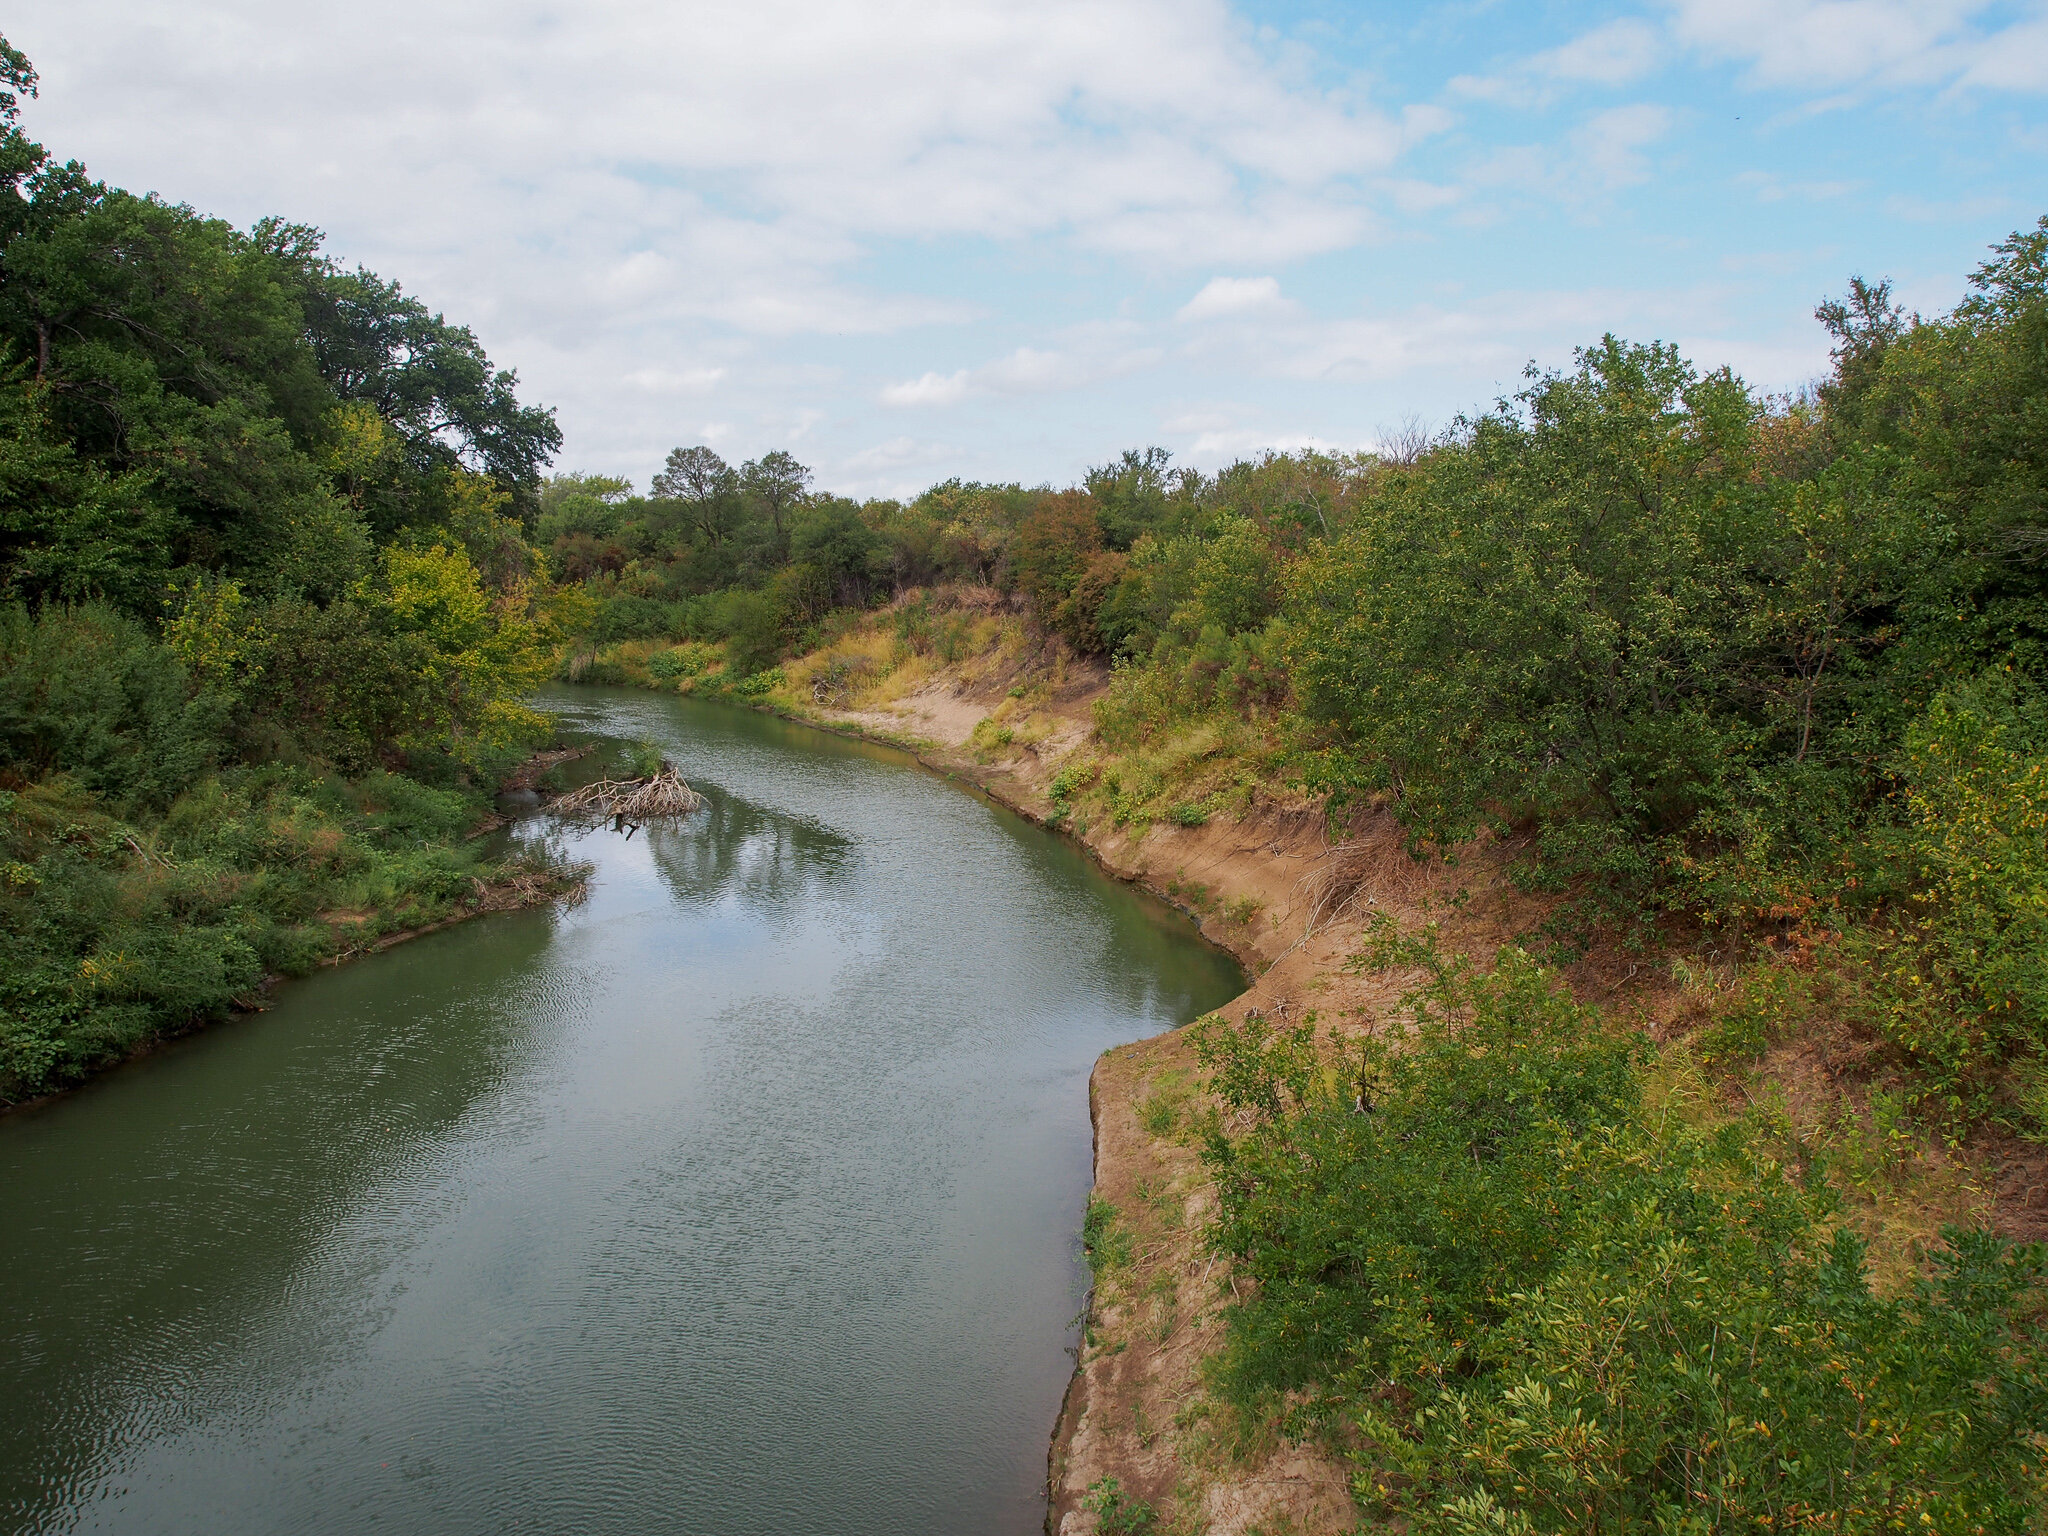  West Fork Trinity River, approaching River Legacy Park.  